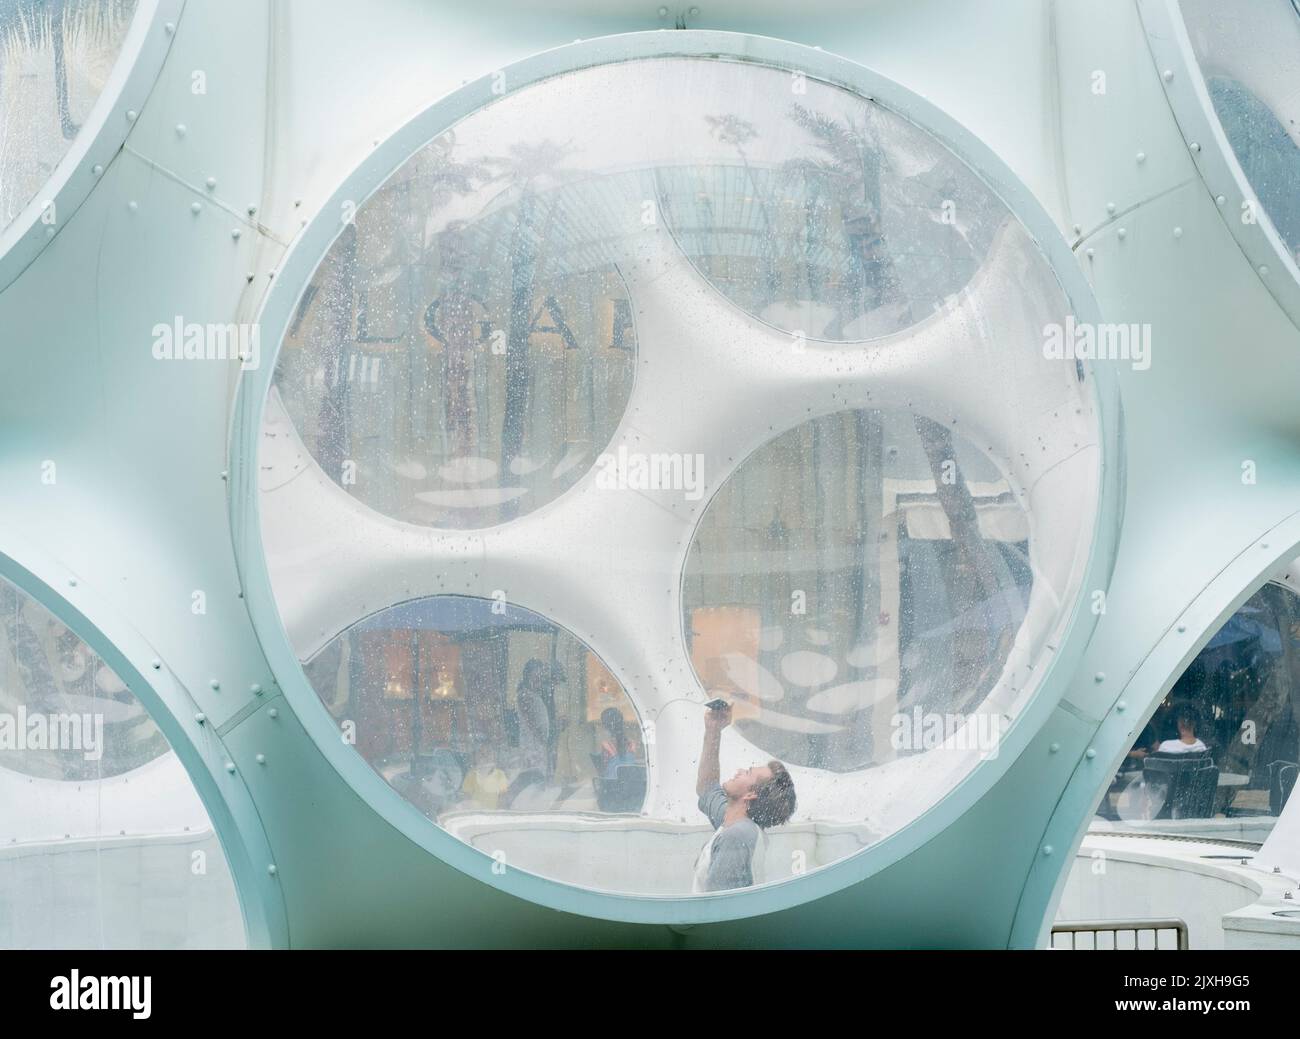 Young man takes a picture in a futuristic glass capsule Stock Photo